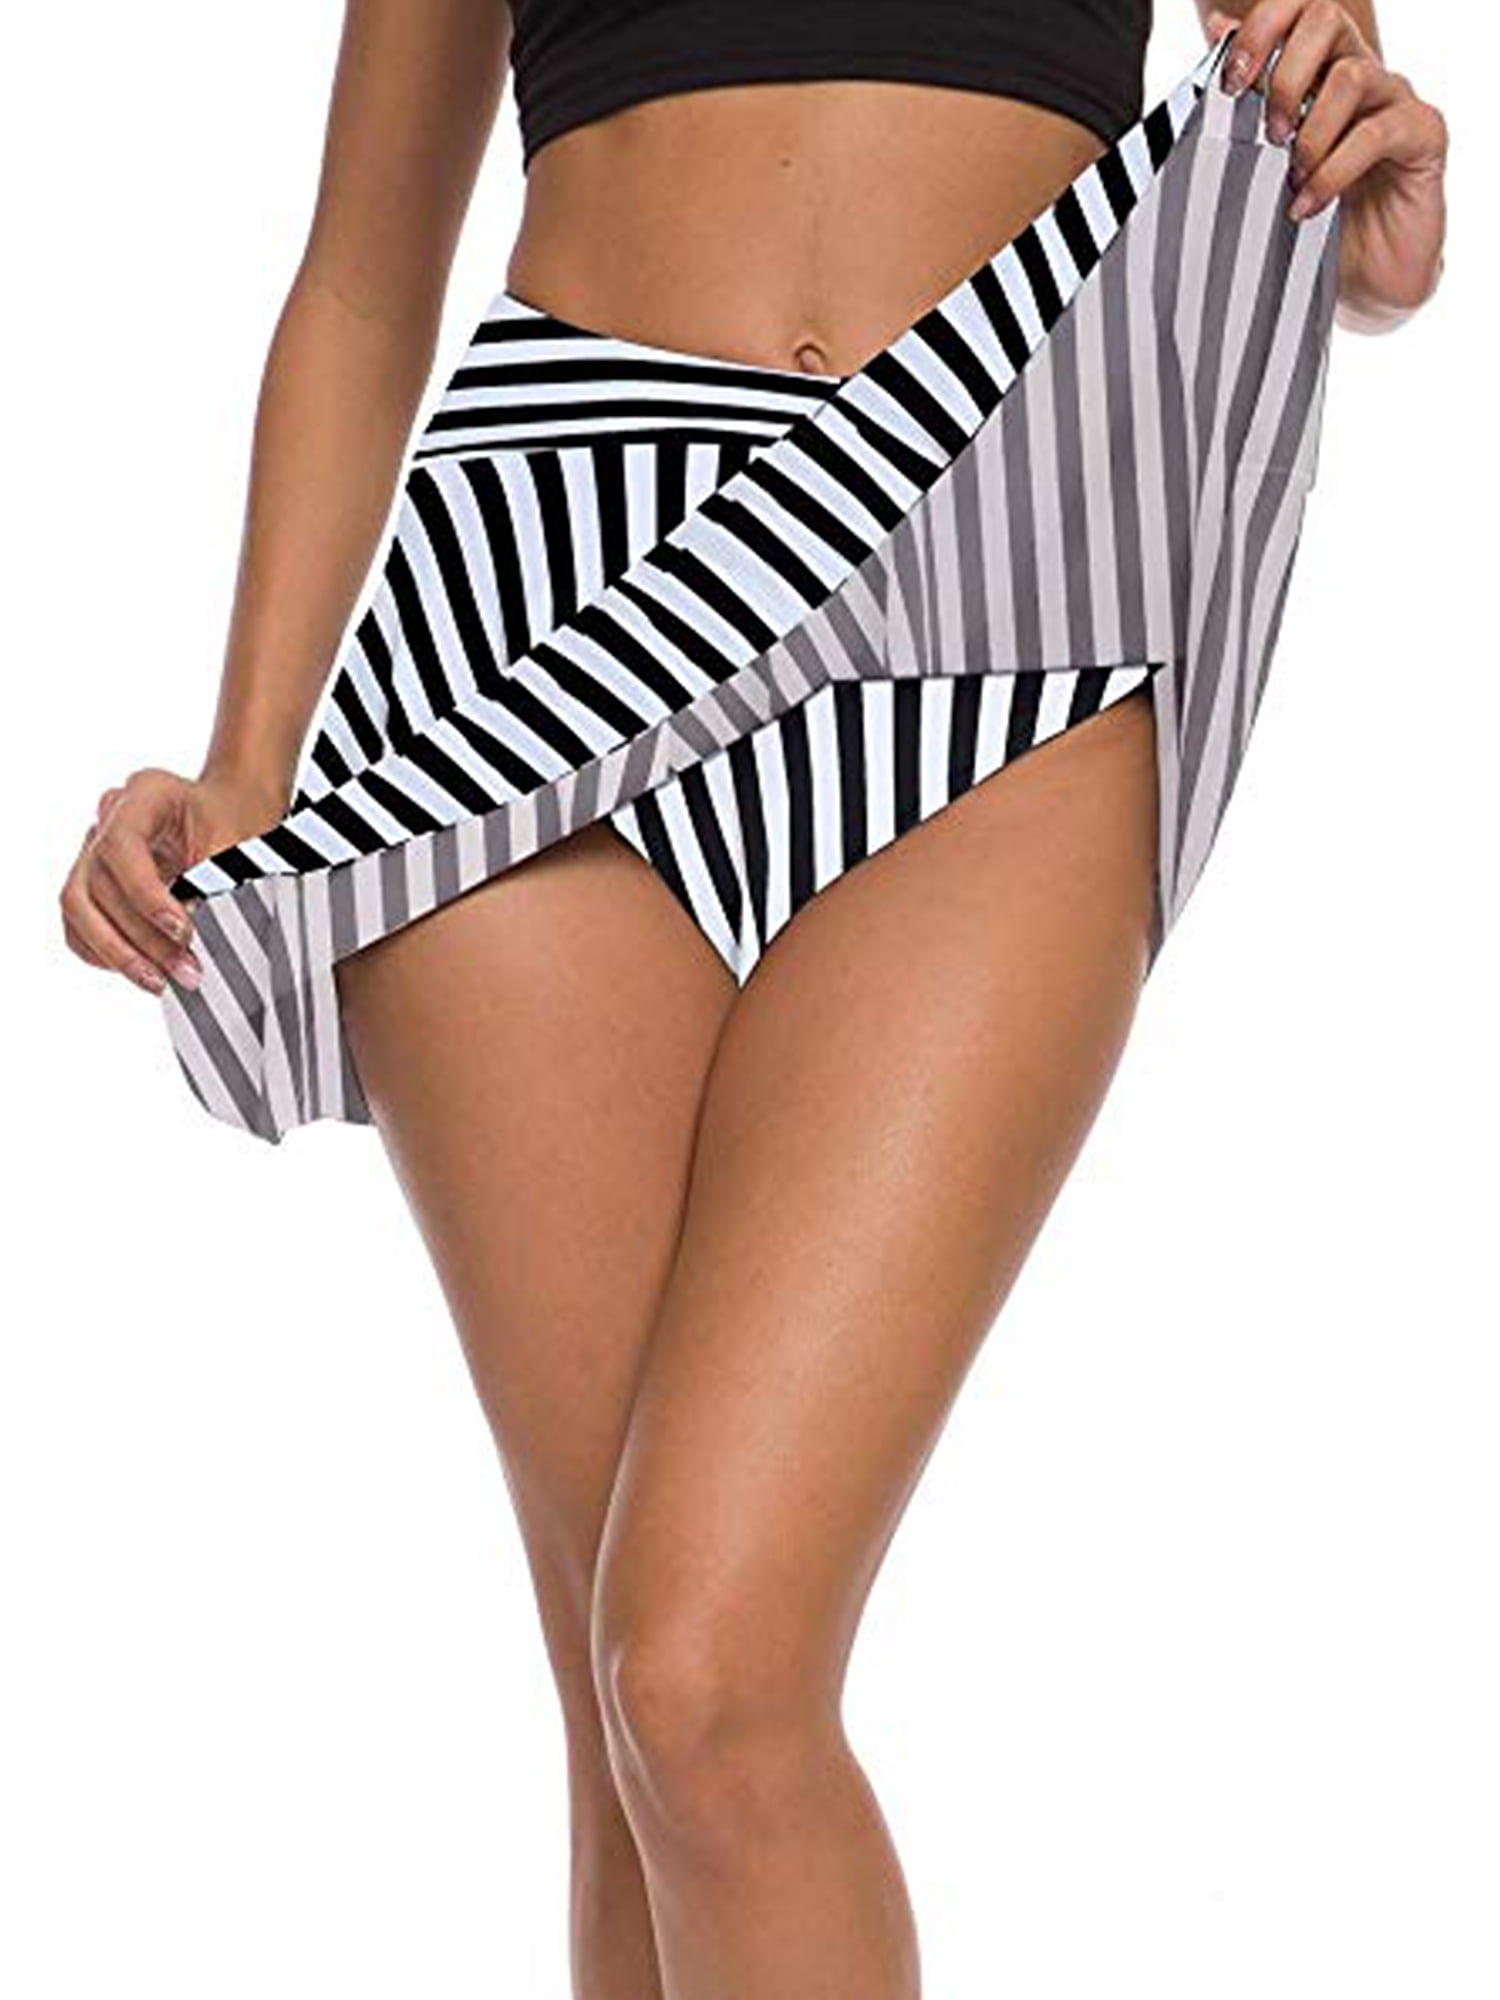 Womens Plus Size Swim Skirt with Built in Panty 